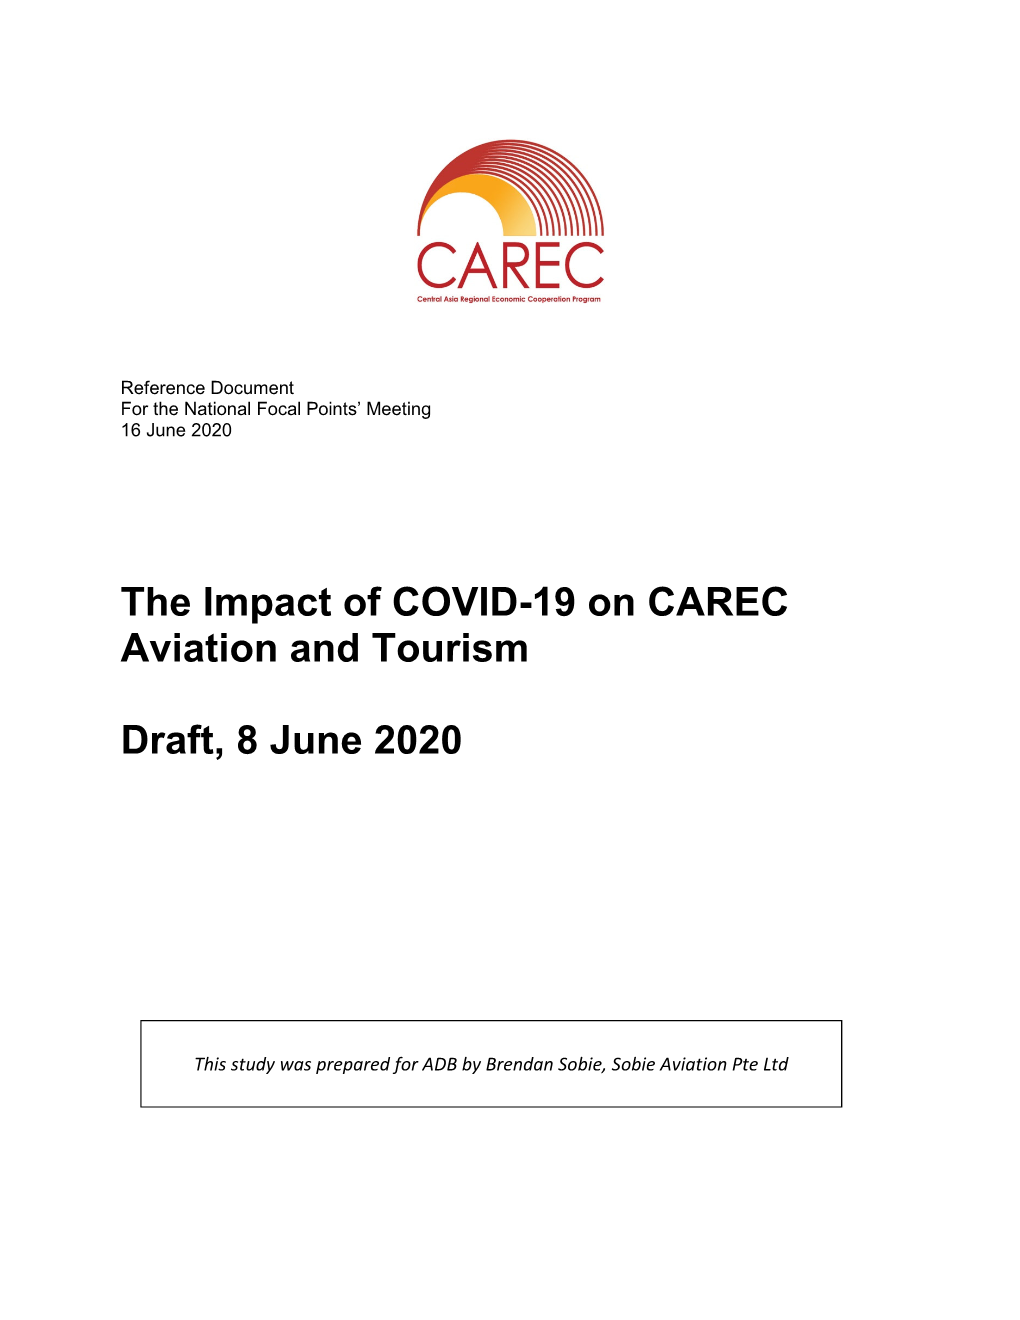 The Impact of COVID-19 on CAREC Aviation and Tourism Draft, 8 June 2020